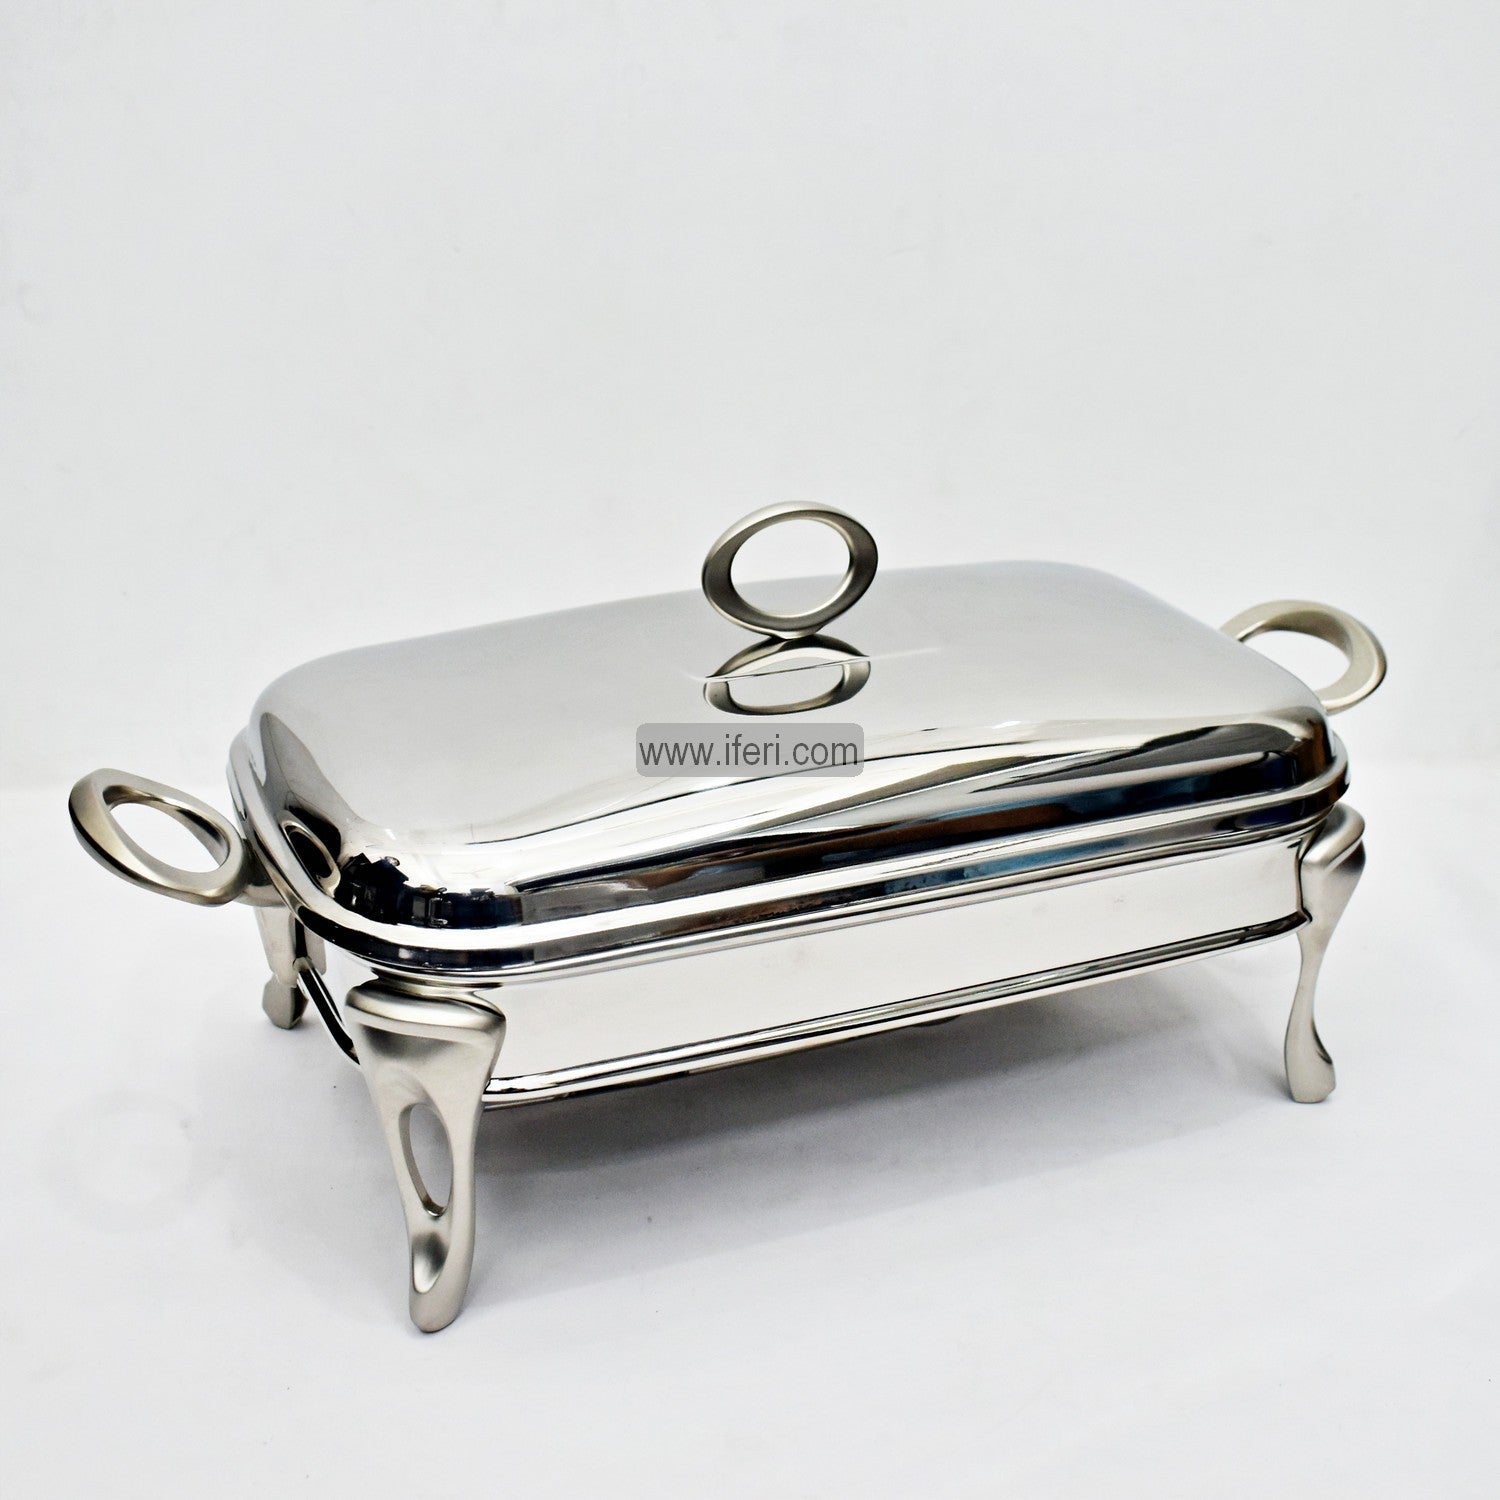 3 Liter Rectangular Exclusive Chafing Dish Food Warmer SY14257